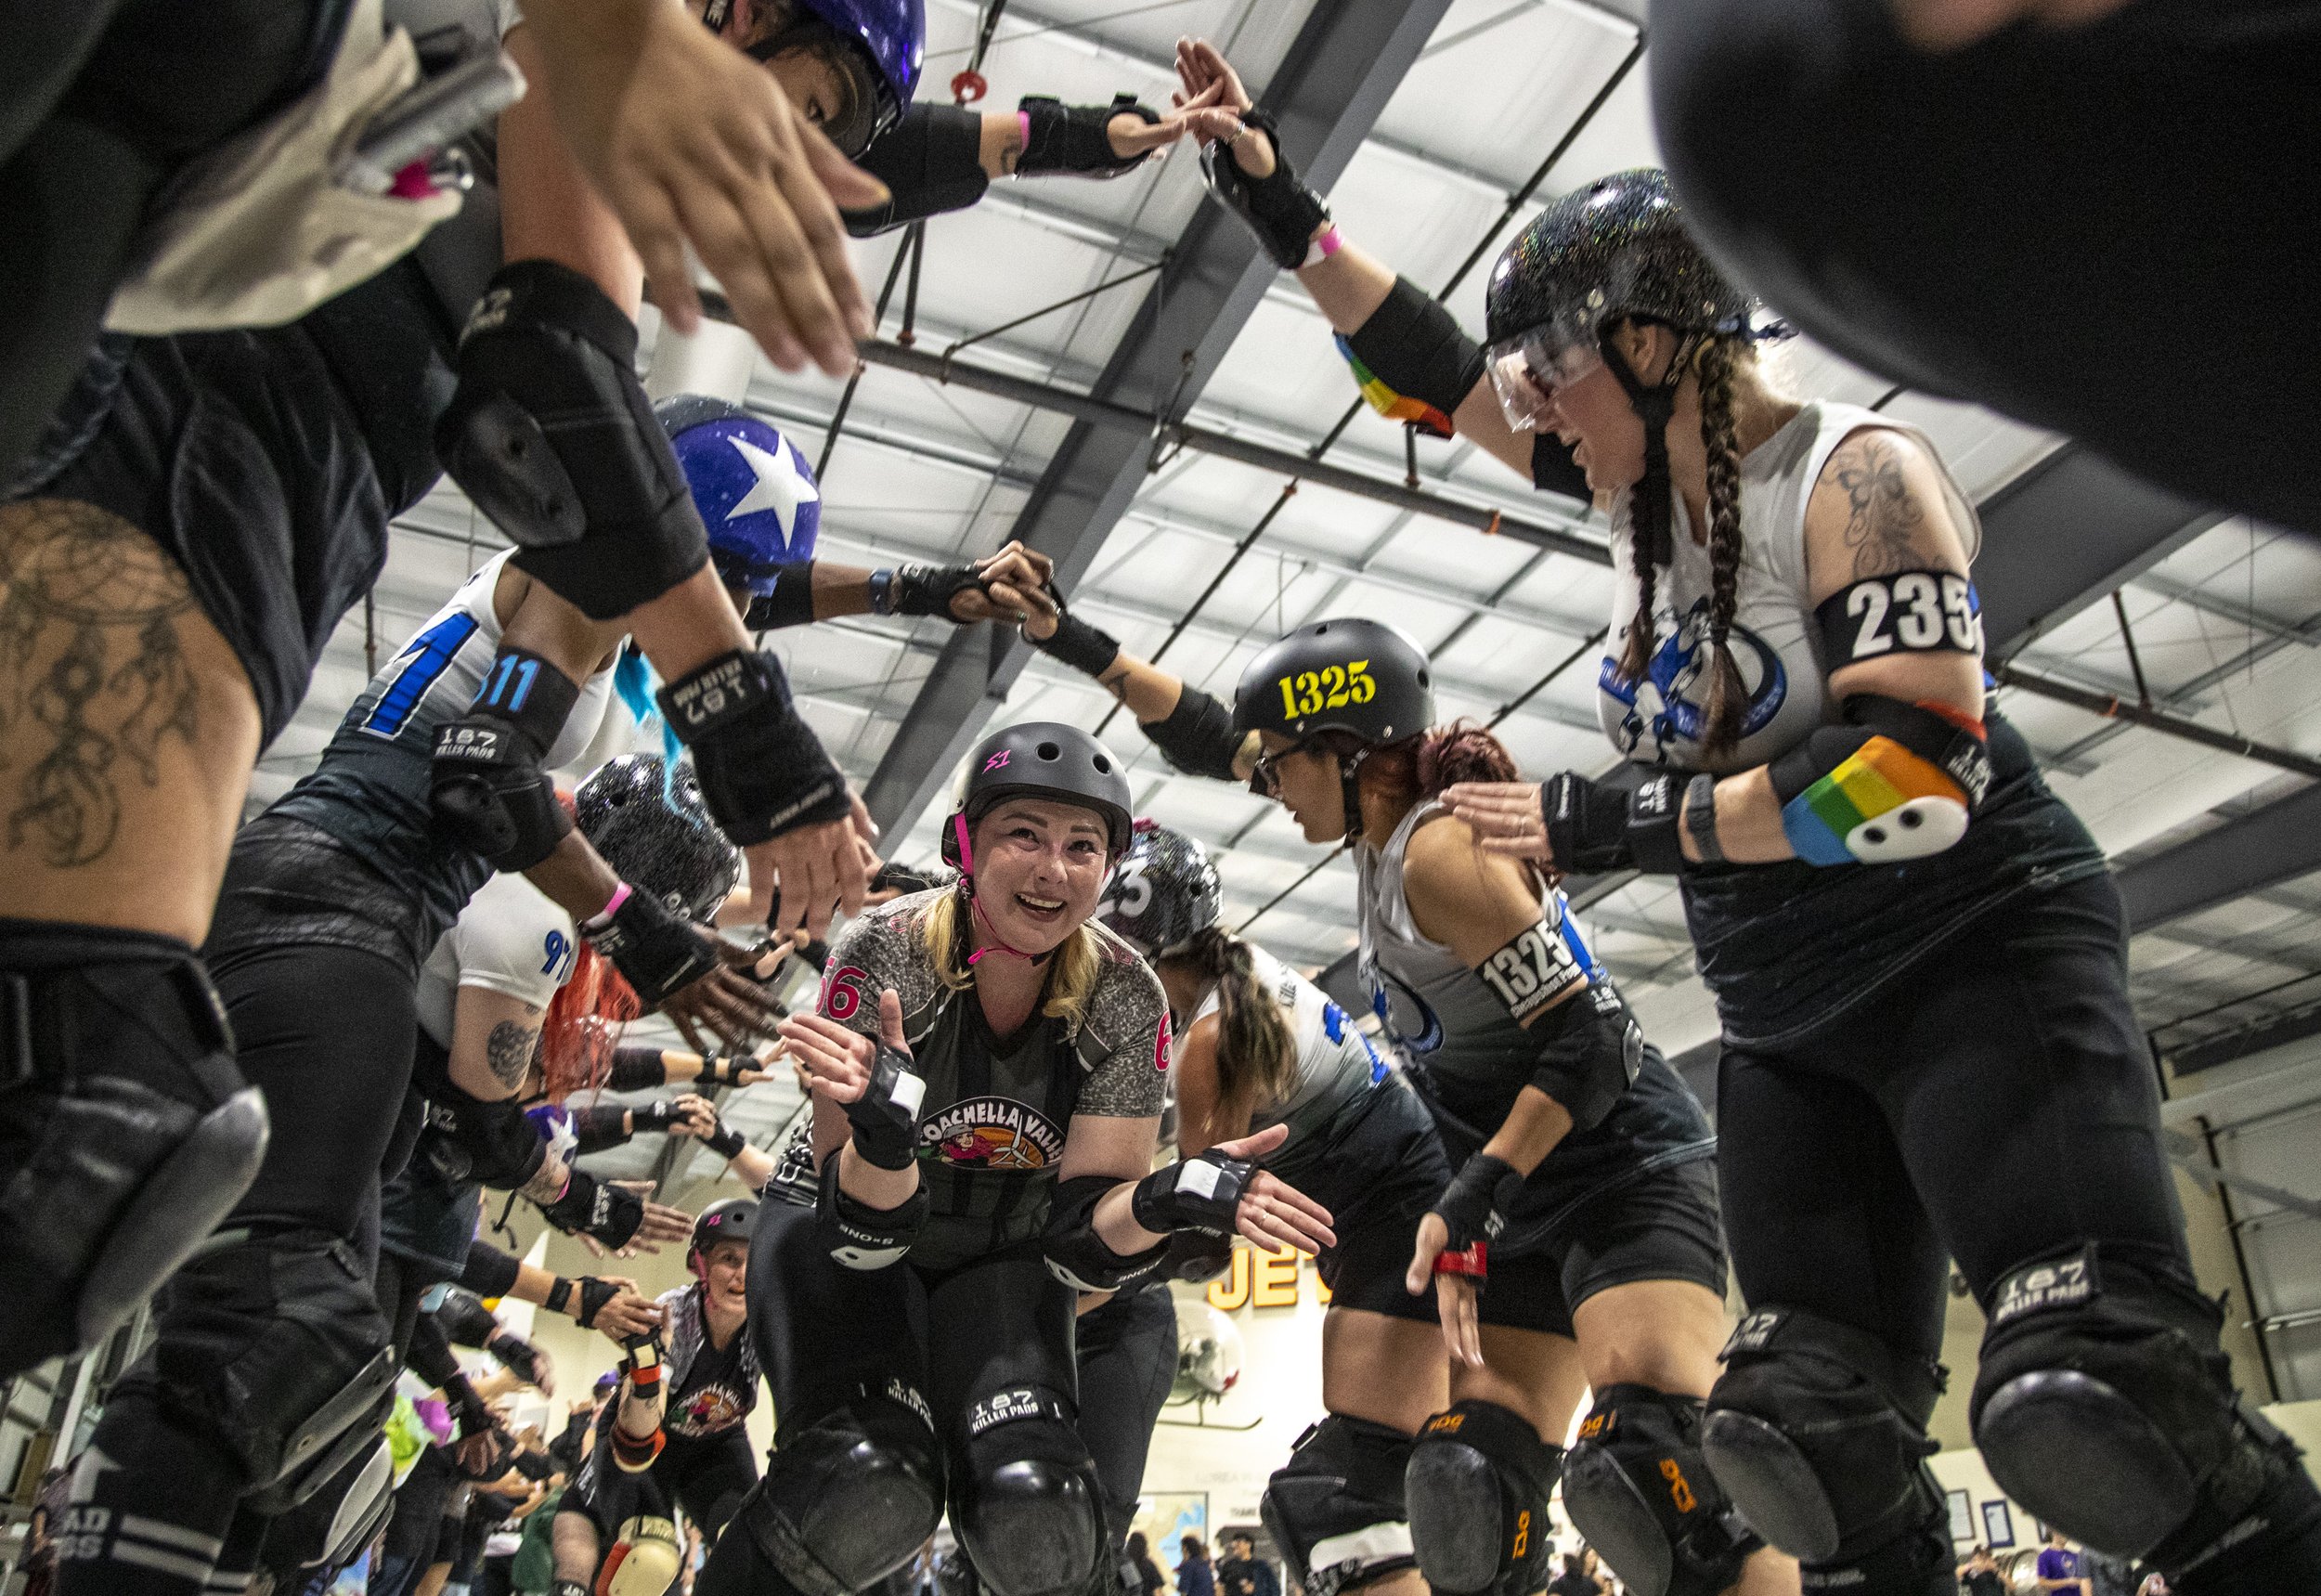  Victoria Villarreal skates through a tunnel of players from their opponent, Infinity Roller Derby, after their homecoming bout at the Palm Springs Air Museum in Palm Springs, Calif., Saturday. Coachella Valley lost the game 213-189 but called it a s